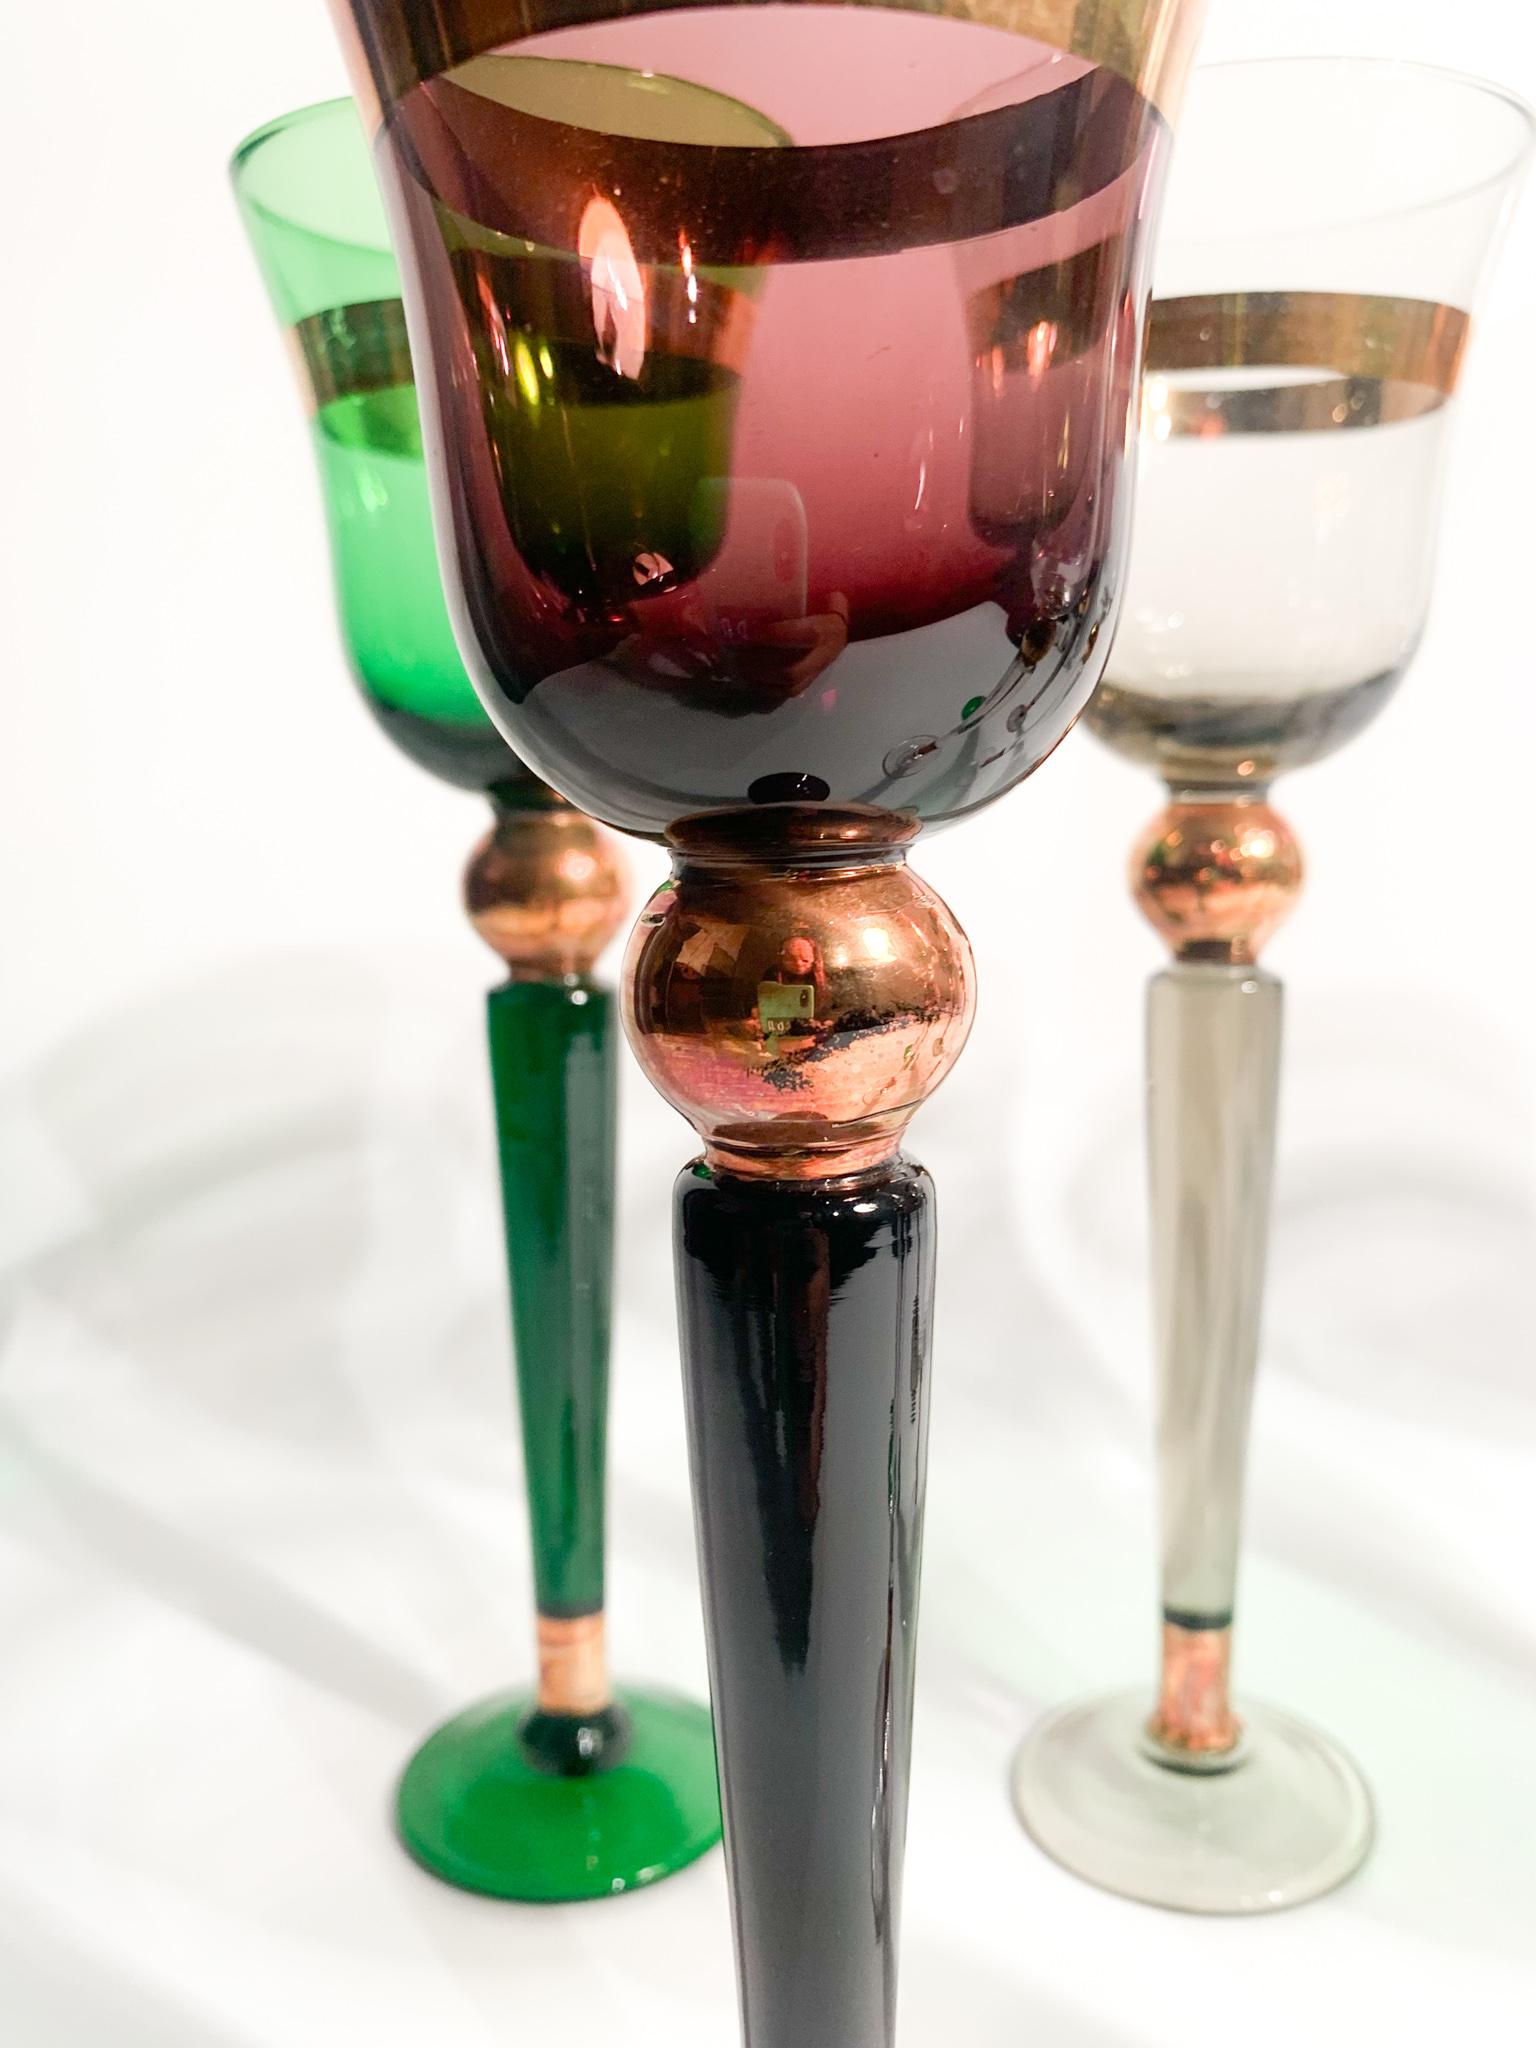 Set of 6 Venini Multicolored Murano Glass Goblets from the 1950s For Sale 6